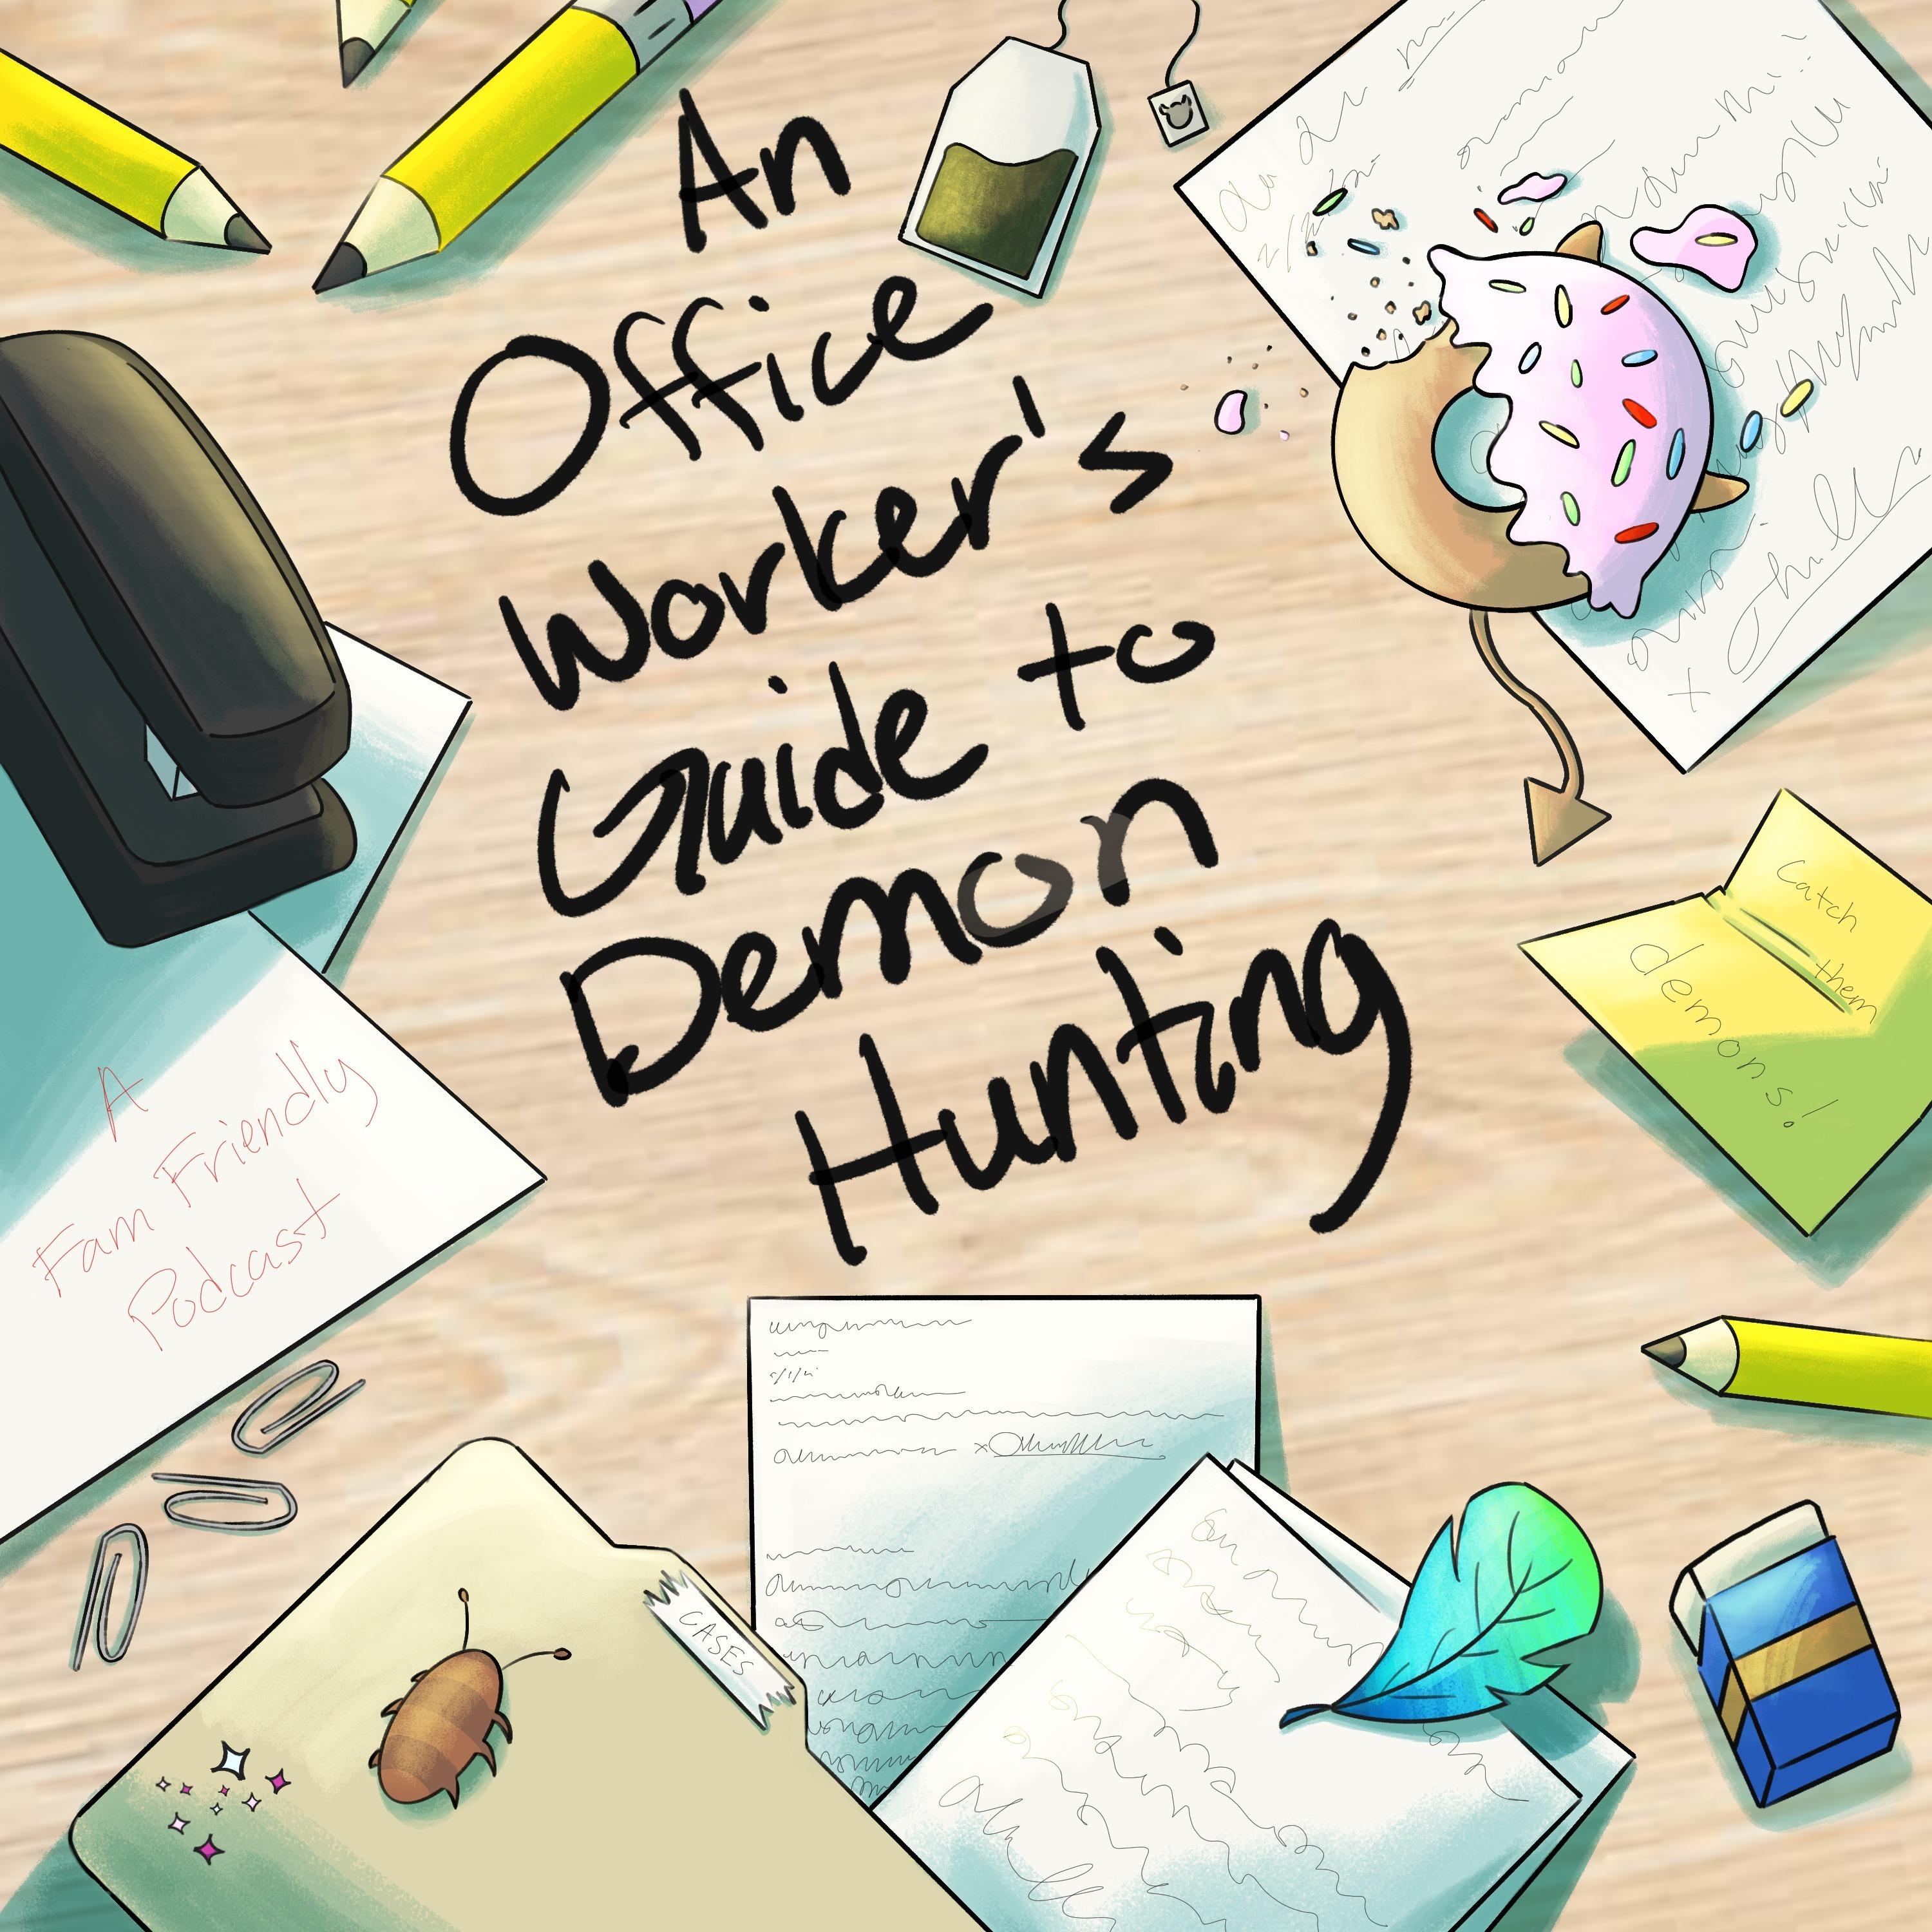 An Office Workers Guide to Demon Hunting